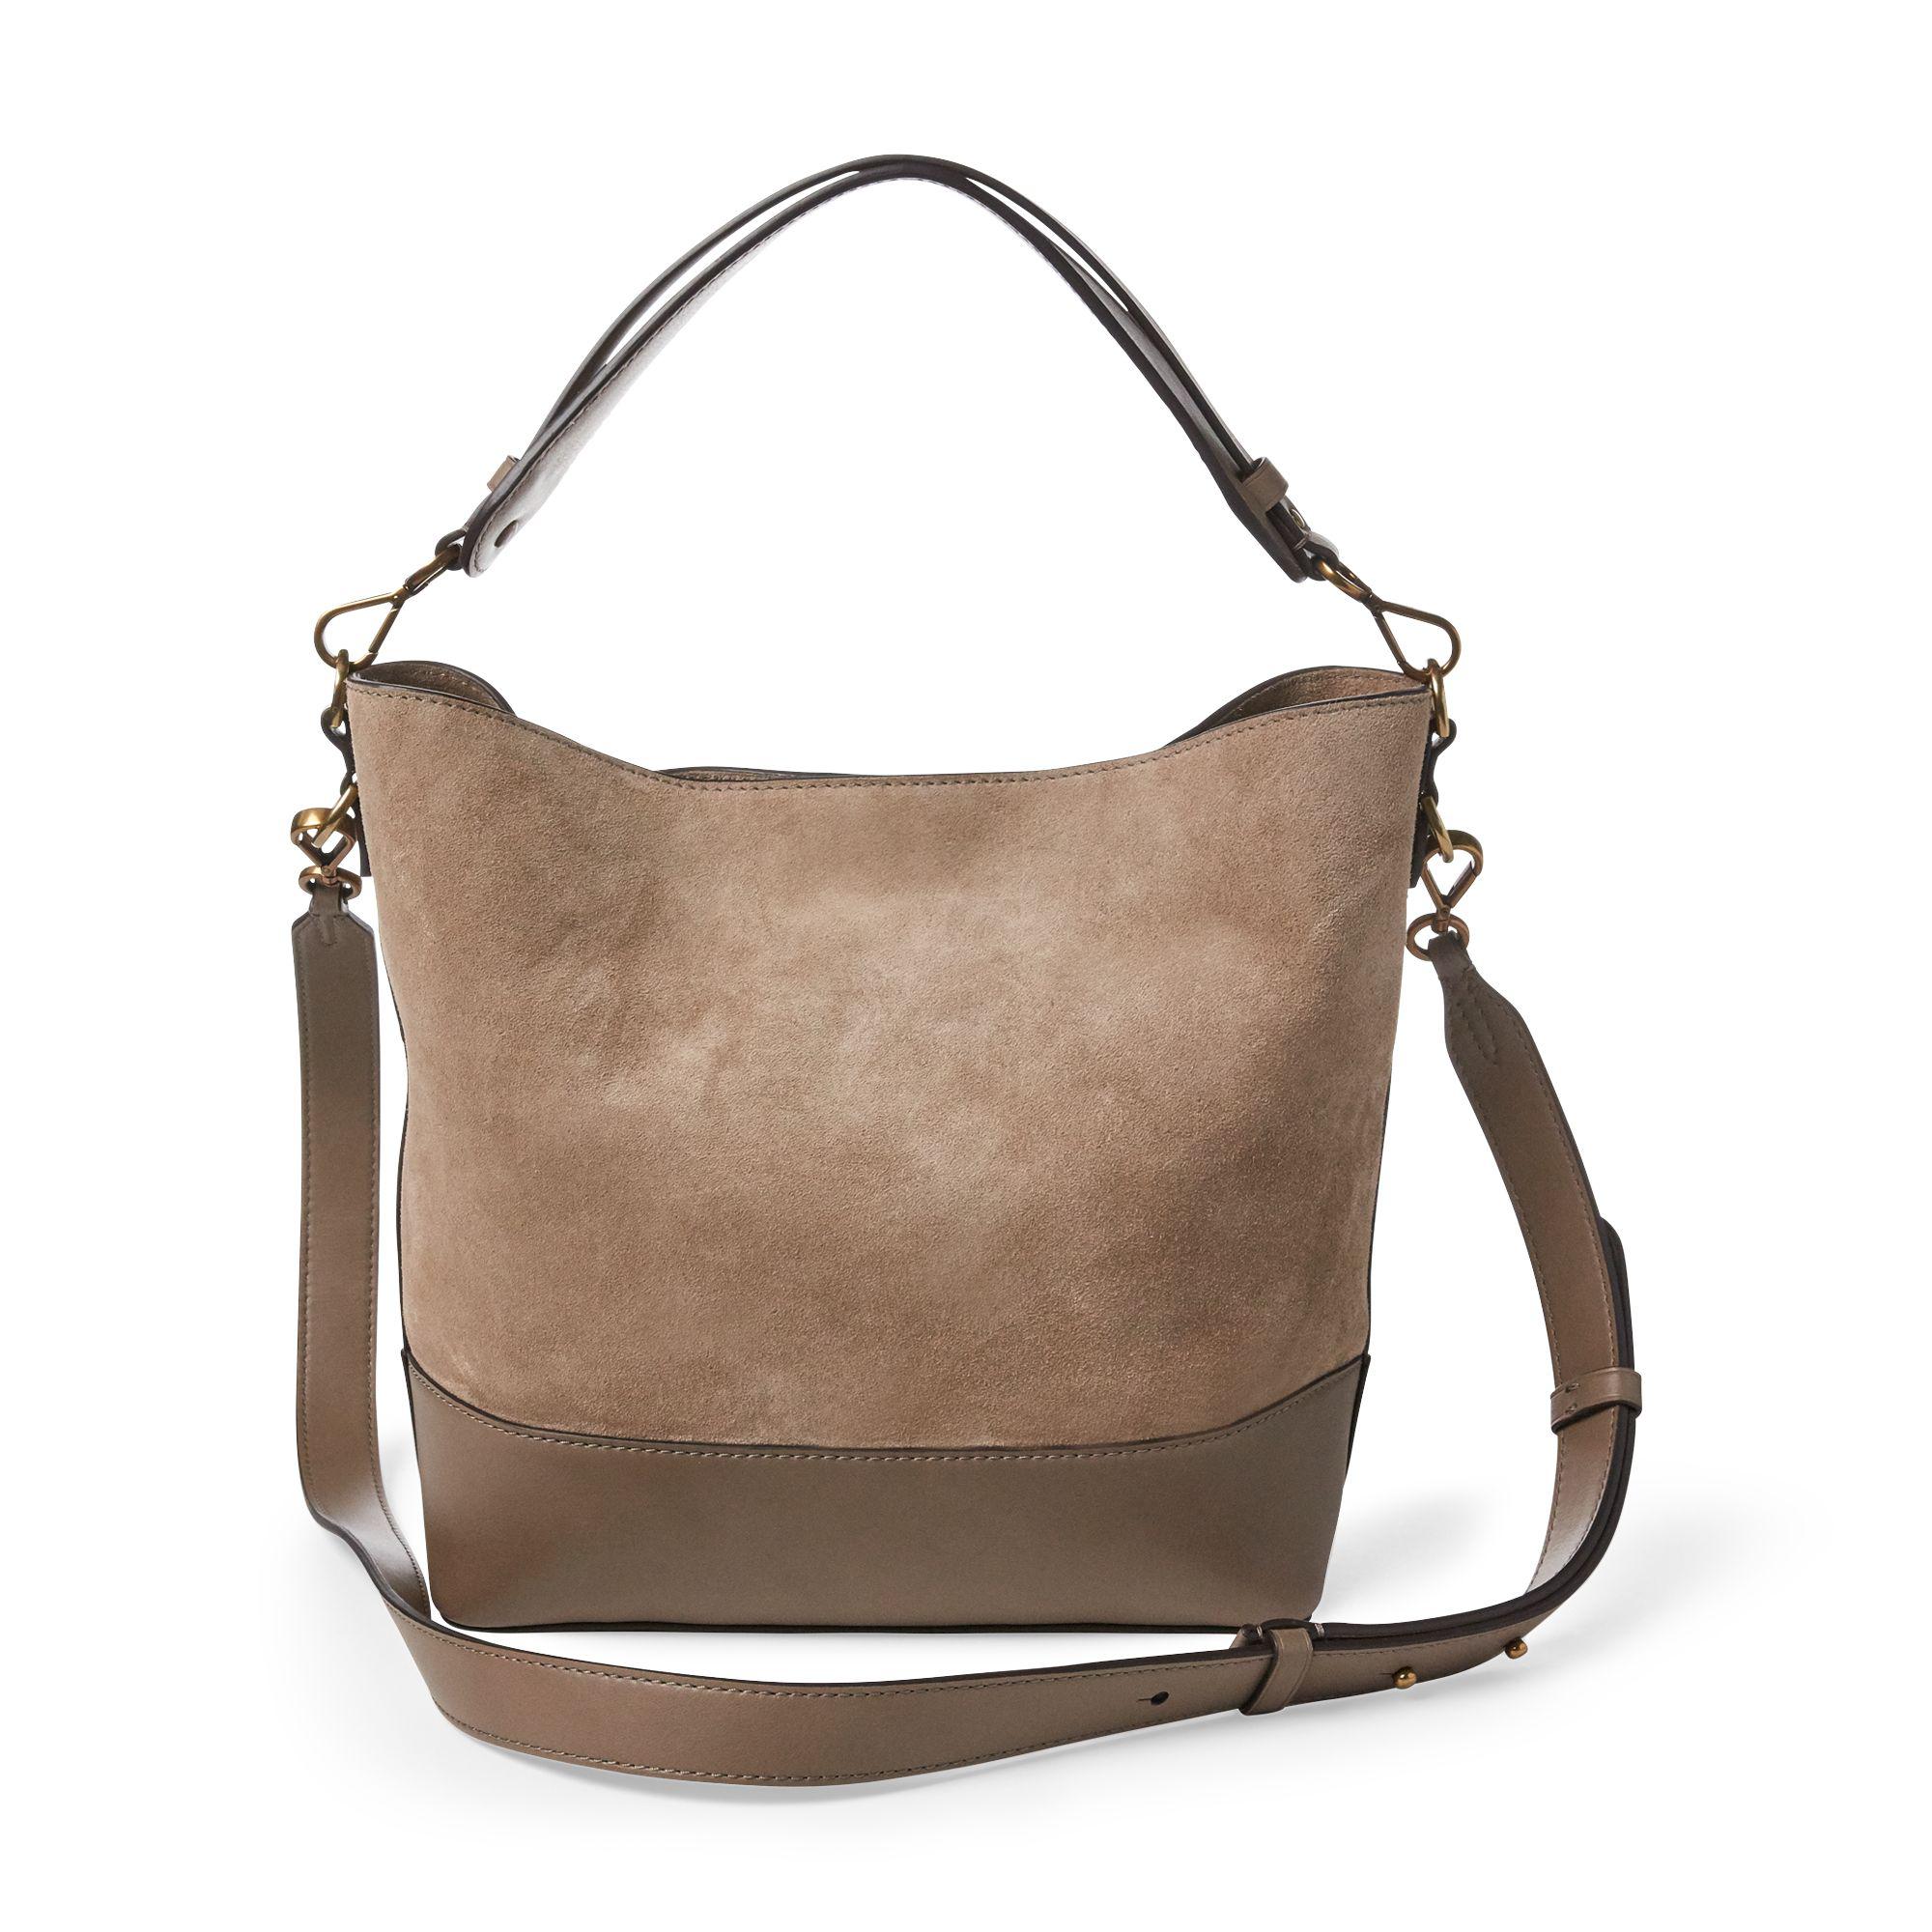 Polo Ralph Lauren Small Suede Leather Hobo Bag in Taupe (Brown) - Lyst